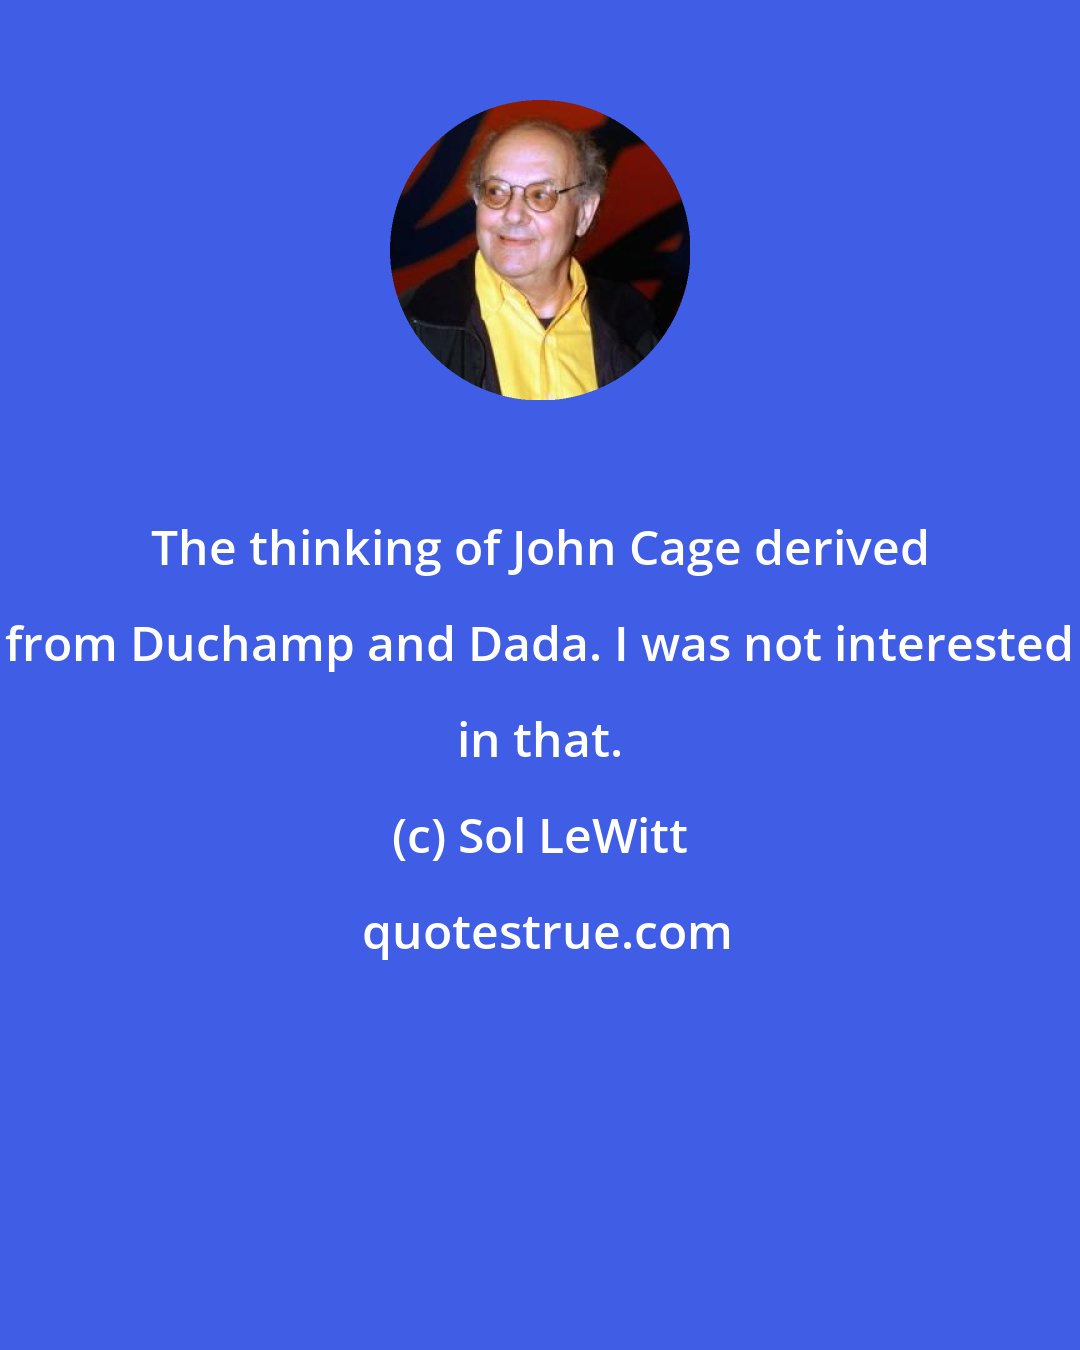 Sol LeWitt: The thinking of John Cage derived from Duchamp and Dada. I was not interested in that.